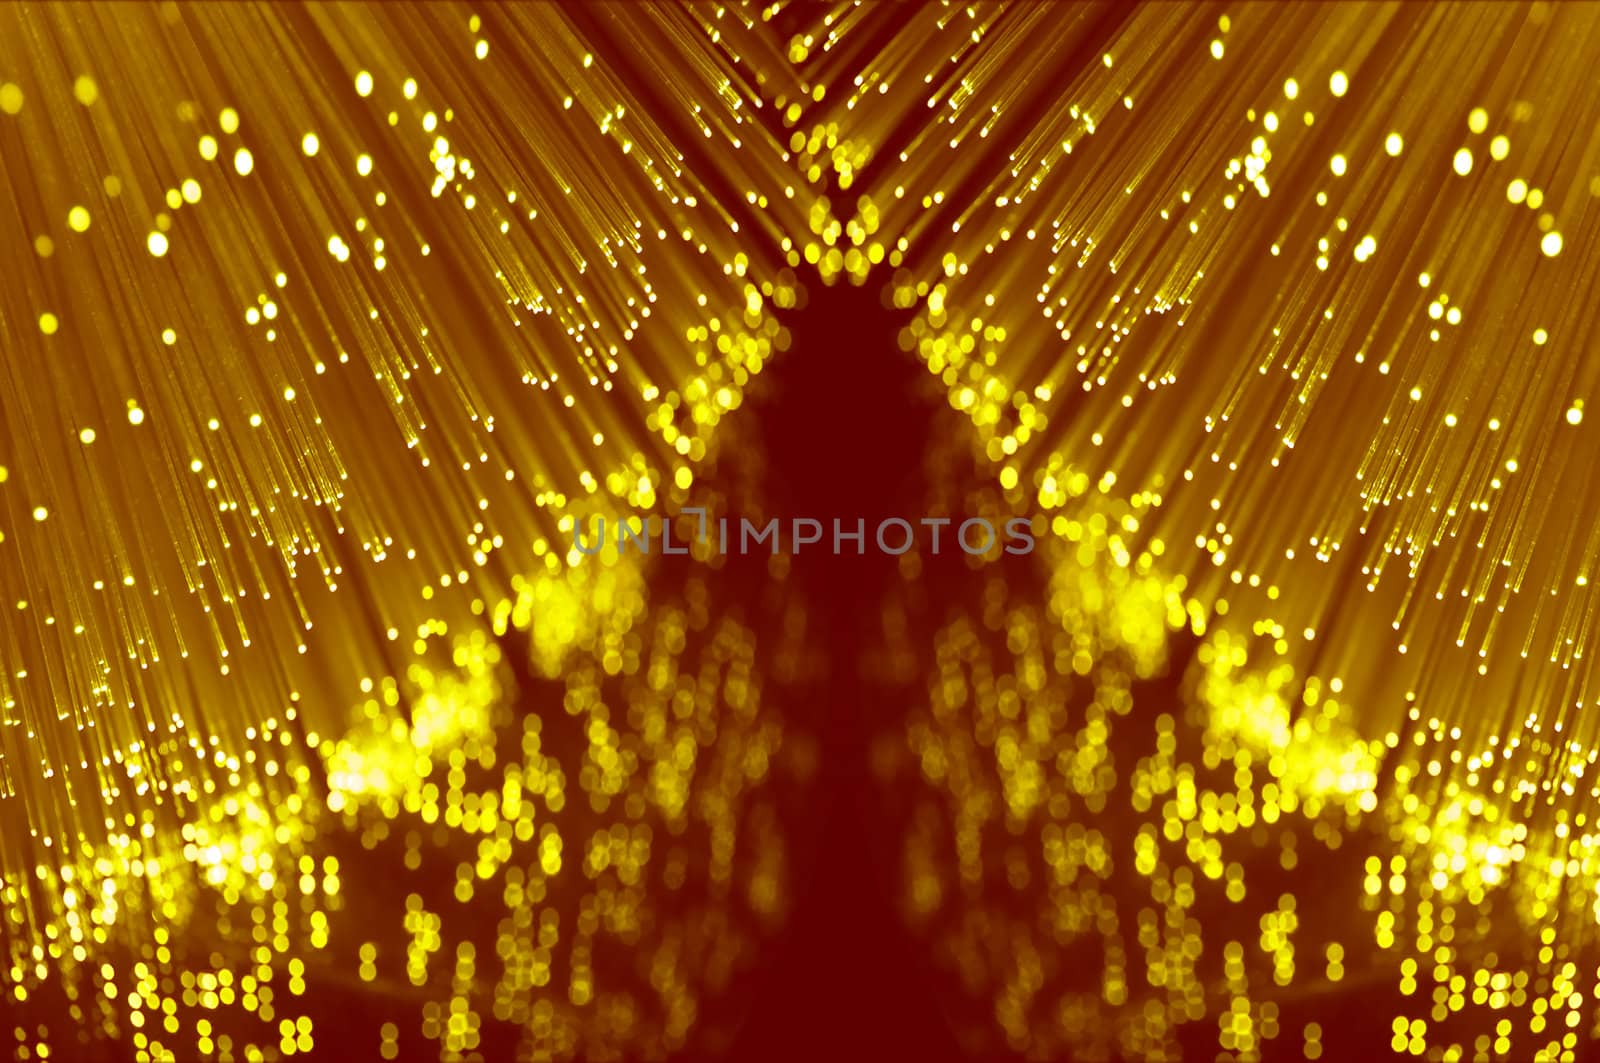 Close up abstract style capturing the ends of many illuminated fibre optic light strands reflecting into the foreground.